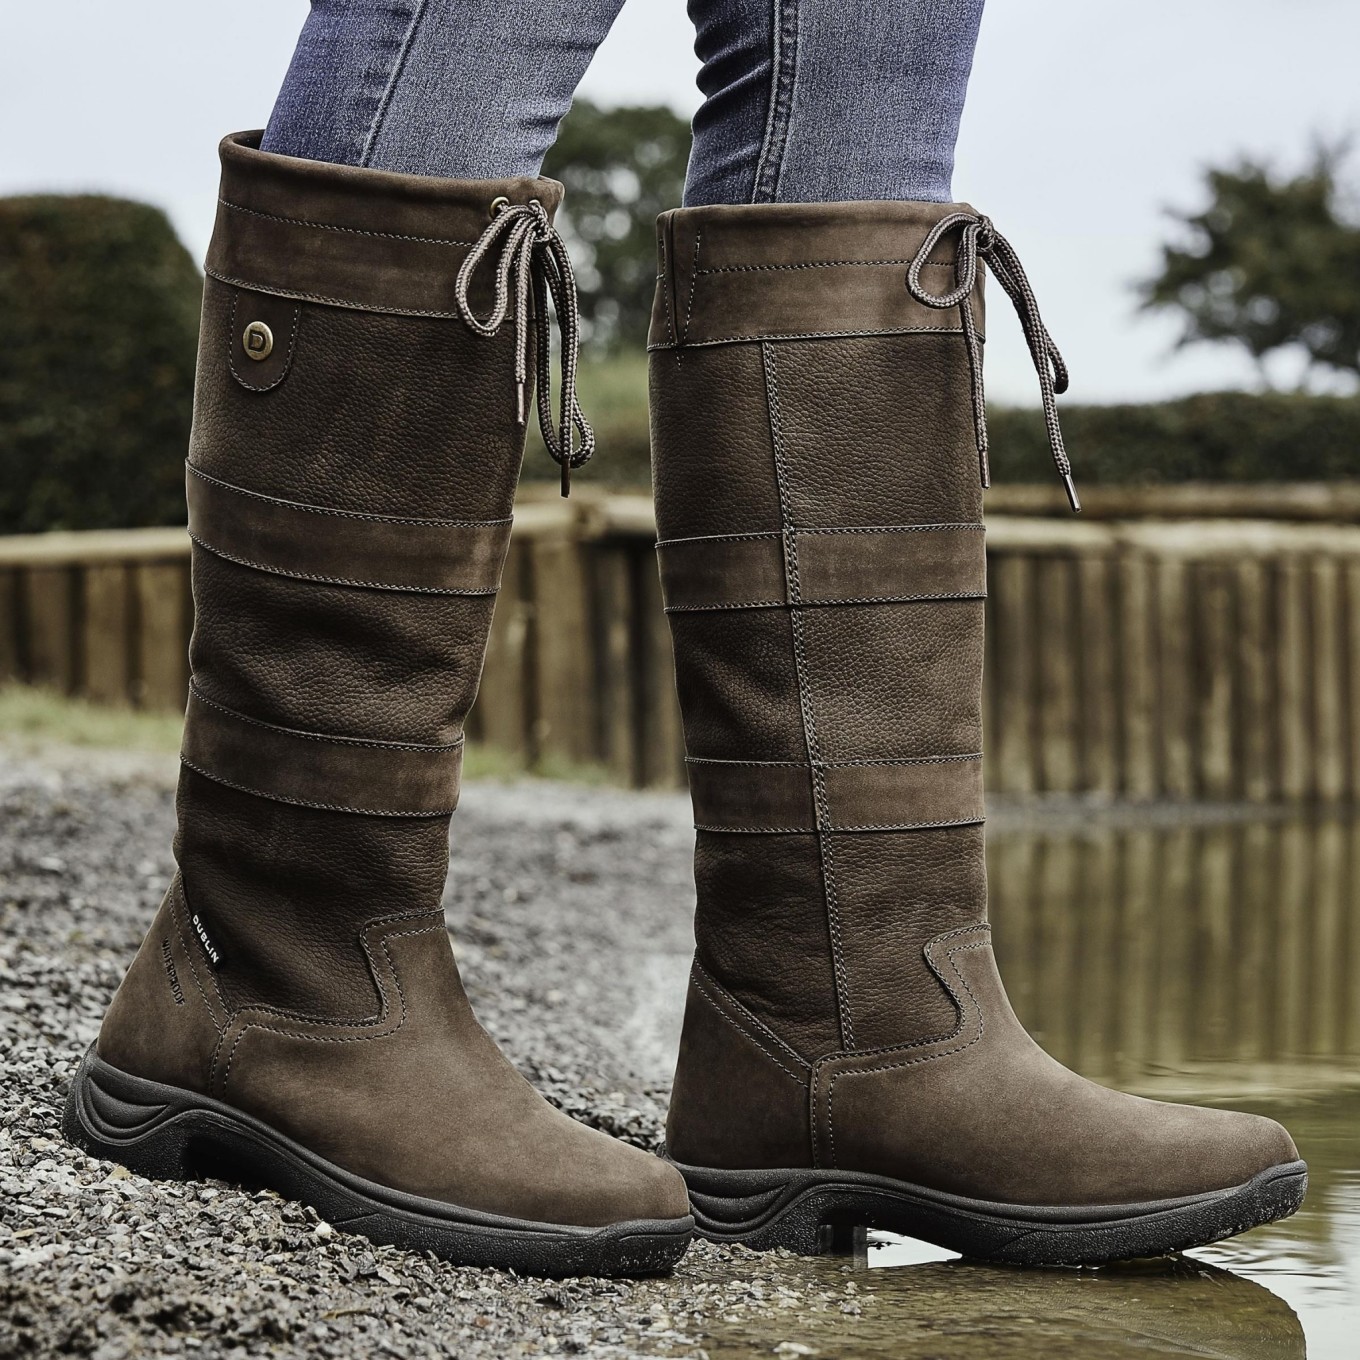 The New Dublin River Boots III